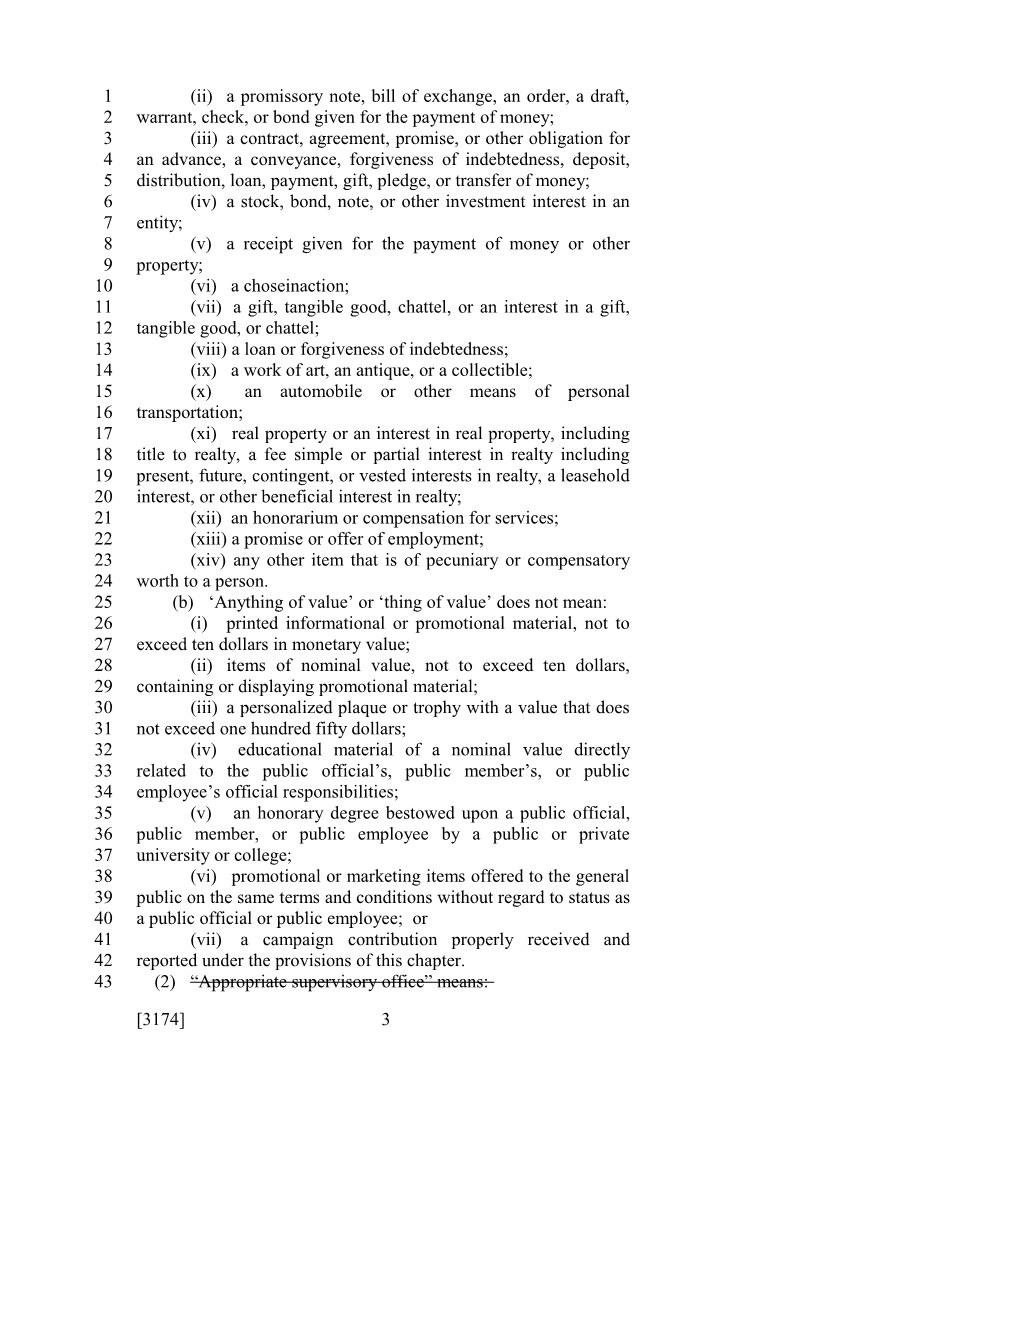 2015-2016 Bill 3174: Ethics, Government Accountability and Campaign Reform Act - South